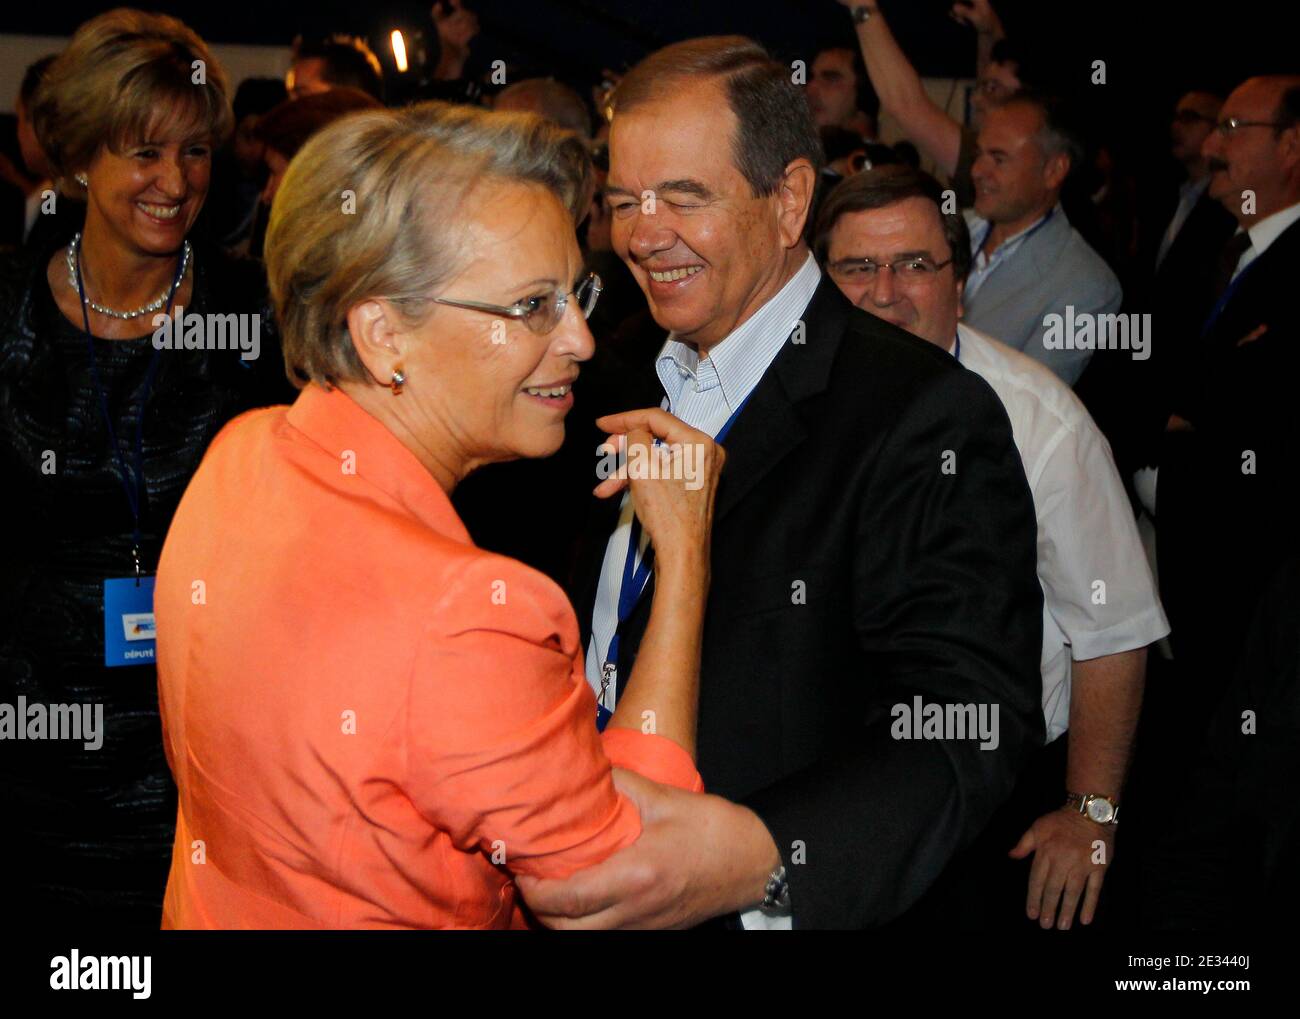 French Minister of state for Justice Michele Alliot-Marie and her companion UMP MP and Rueil-Malmaison's mayor Patrick Ollier attend the first day of Right ruling party UMP parliamentary days in Biarritz, France on September 23, 2010. Photo by Bernard Patrick/ABACAPRESS.COM Stock Photo